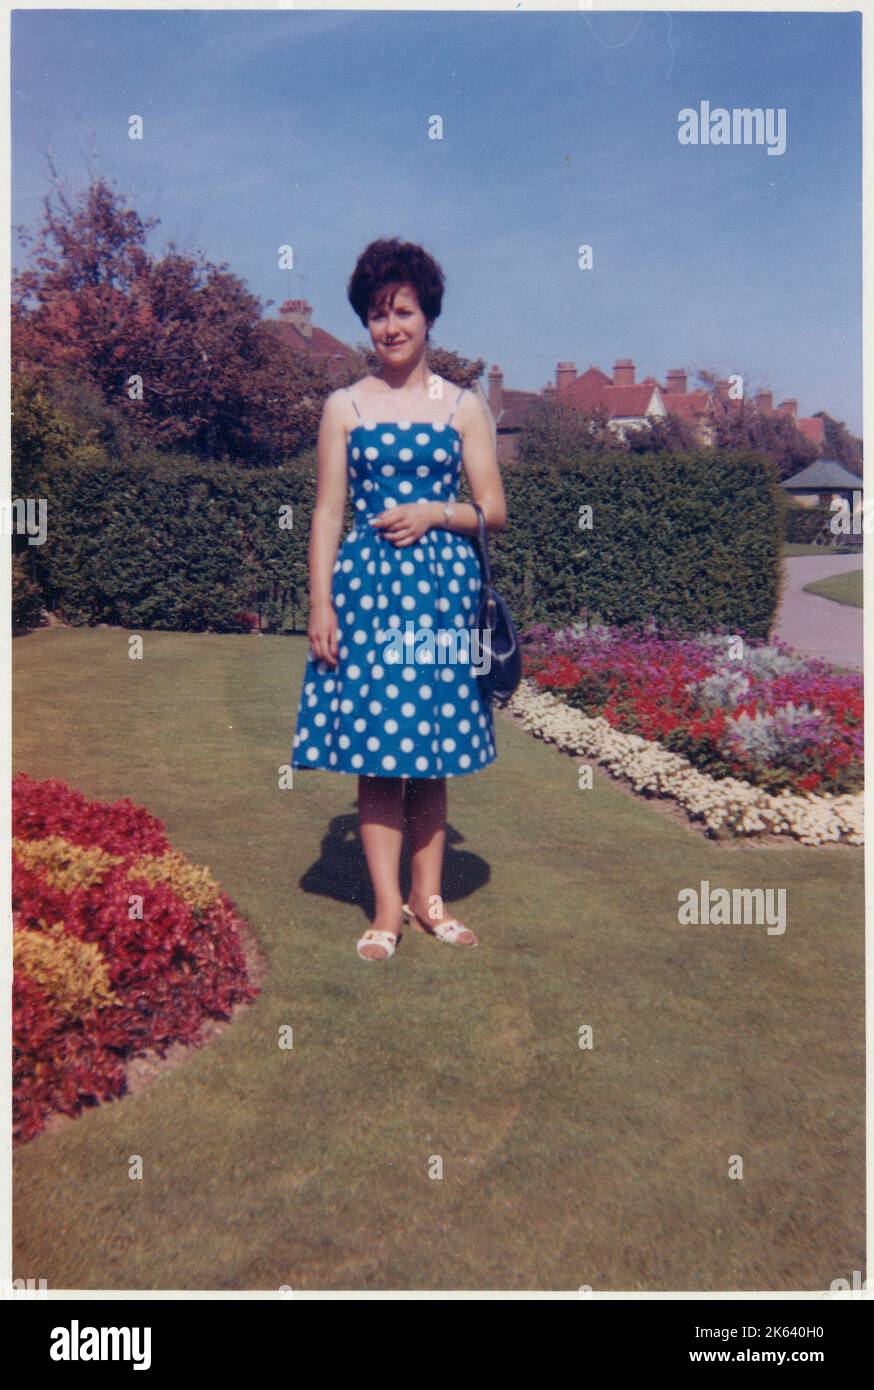 A young lady standing between two beautifully-manicured flowerbeds in a neat British suburban garden, She stands very smartly-dressed in a blue and white polka dot dress, her hair fashionably styled - September, 1962. Stock Photo